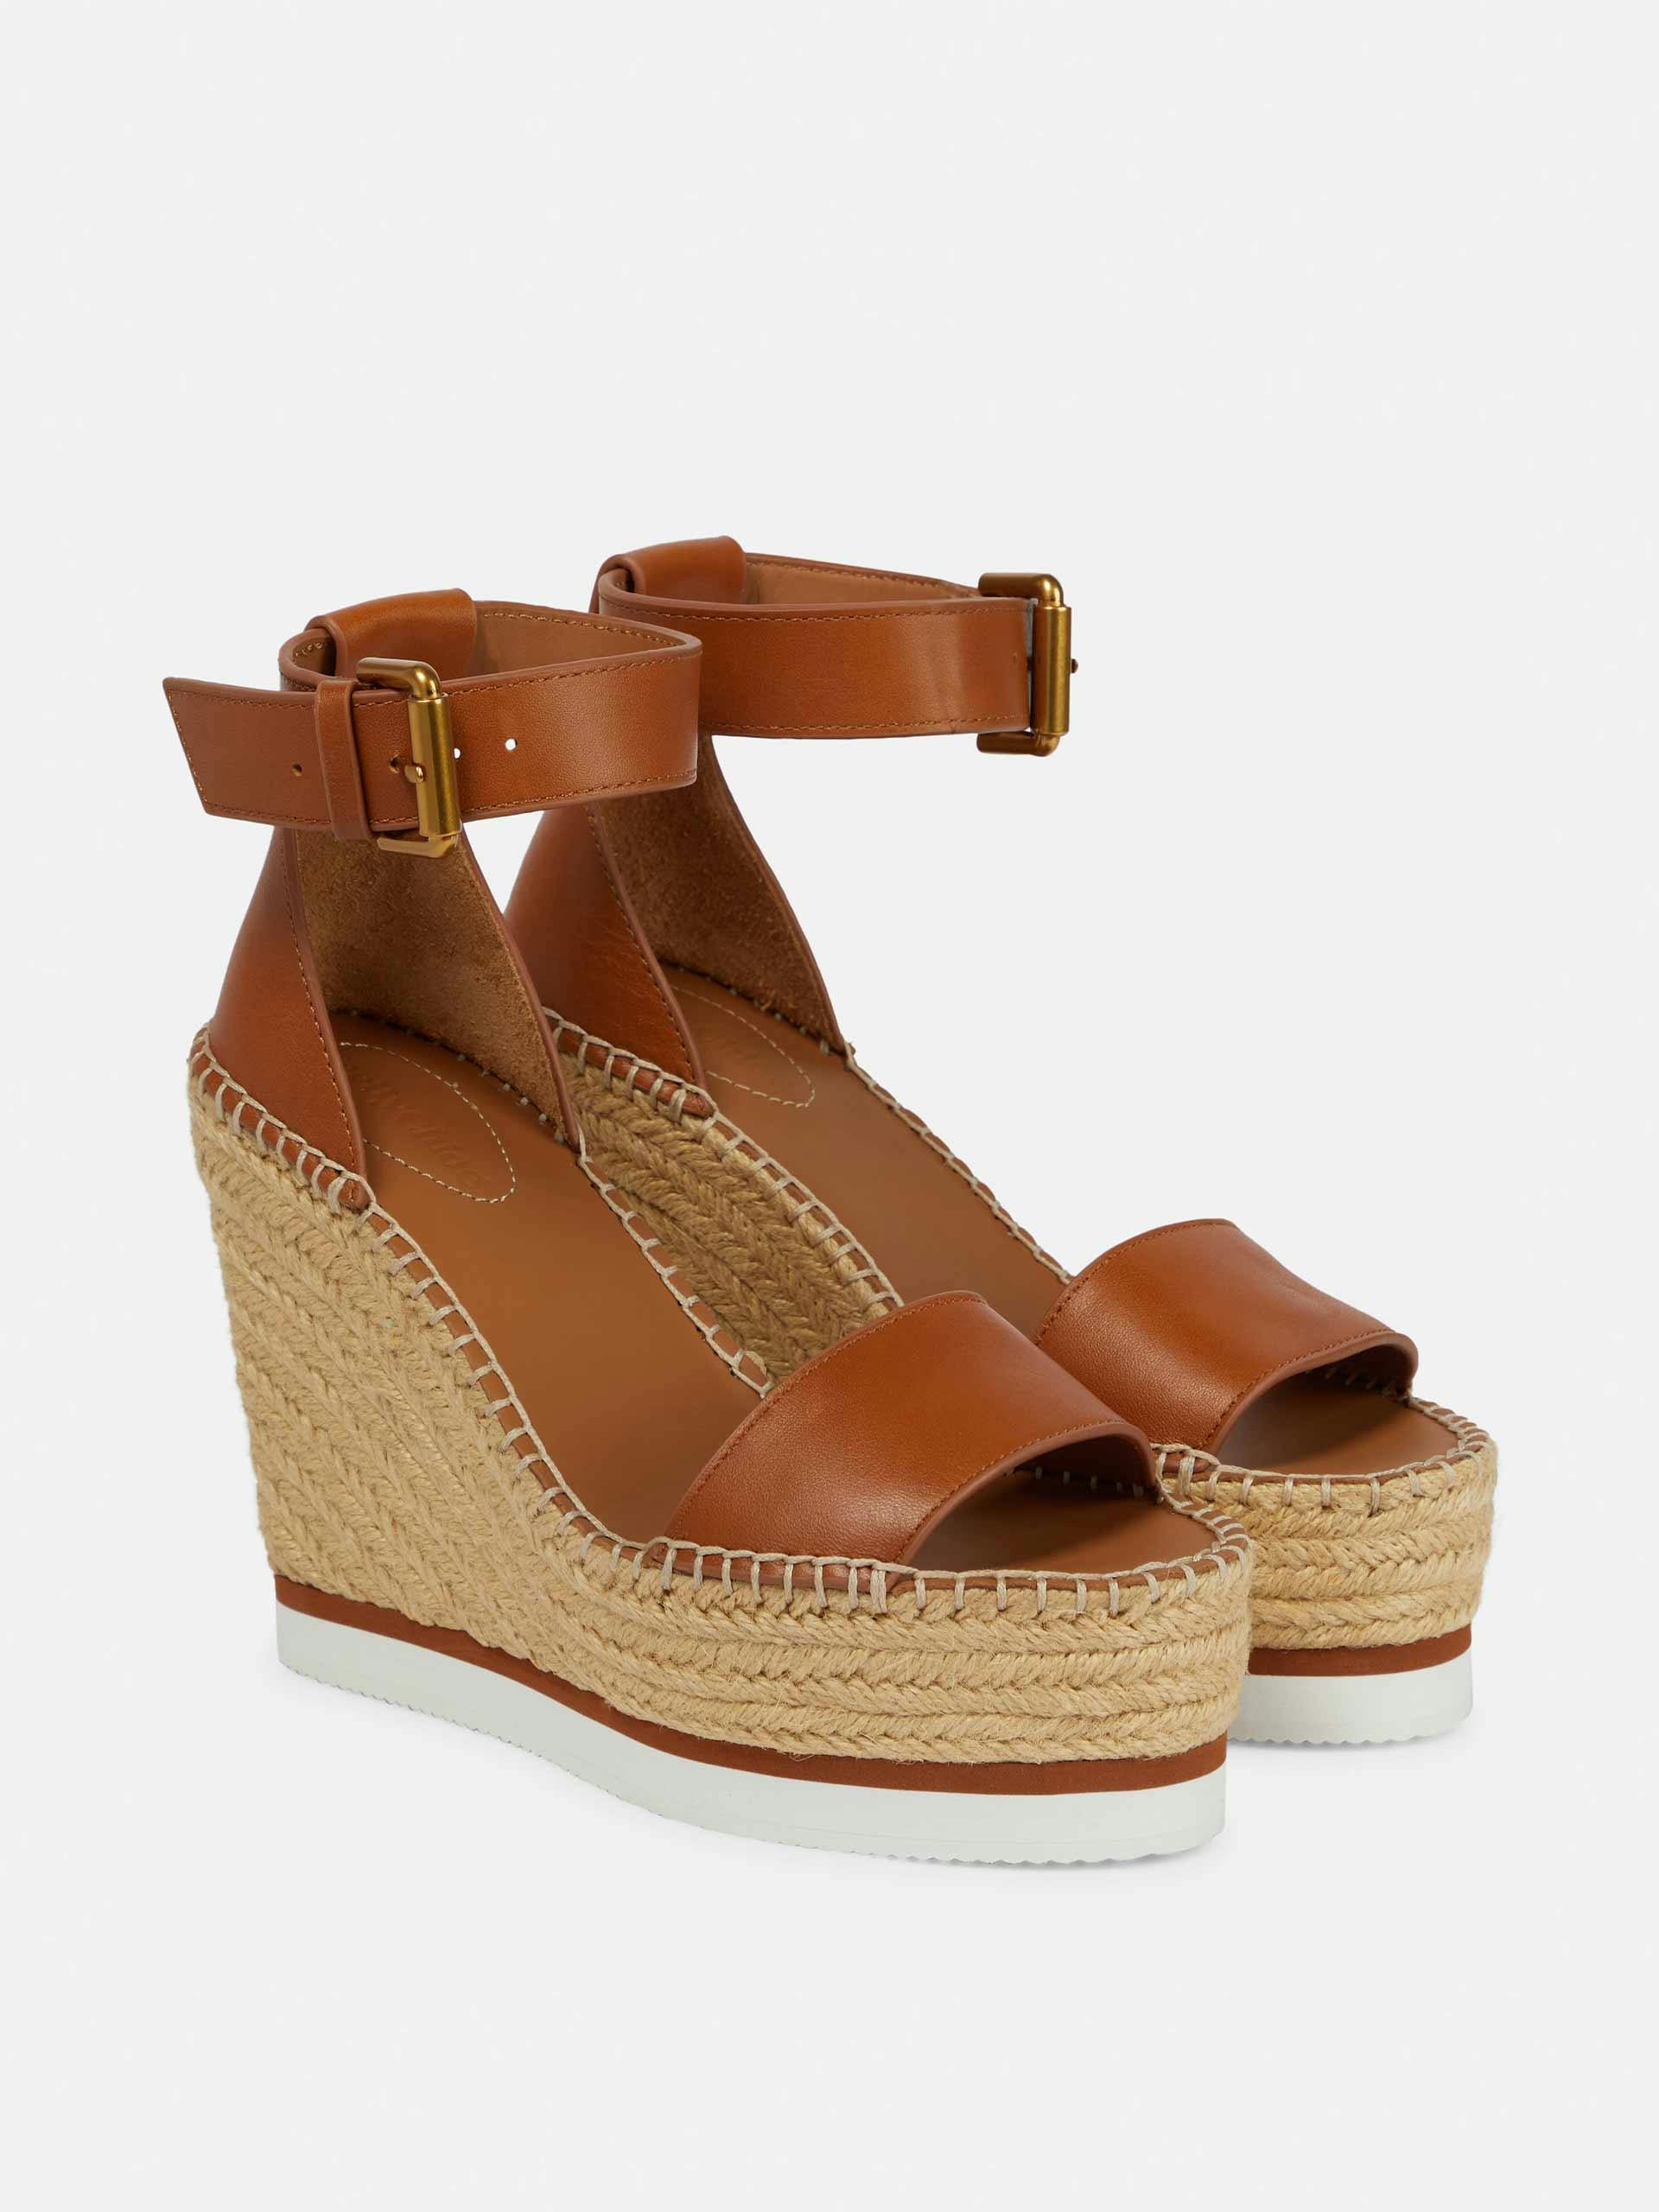 Brown leather espadrille wedges